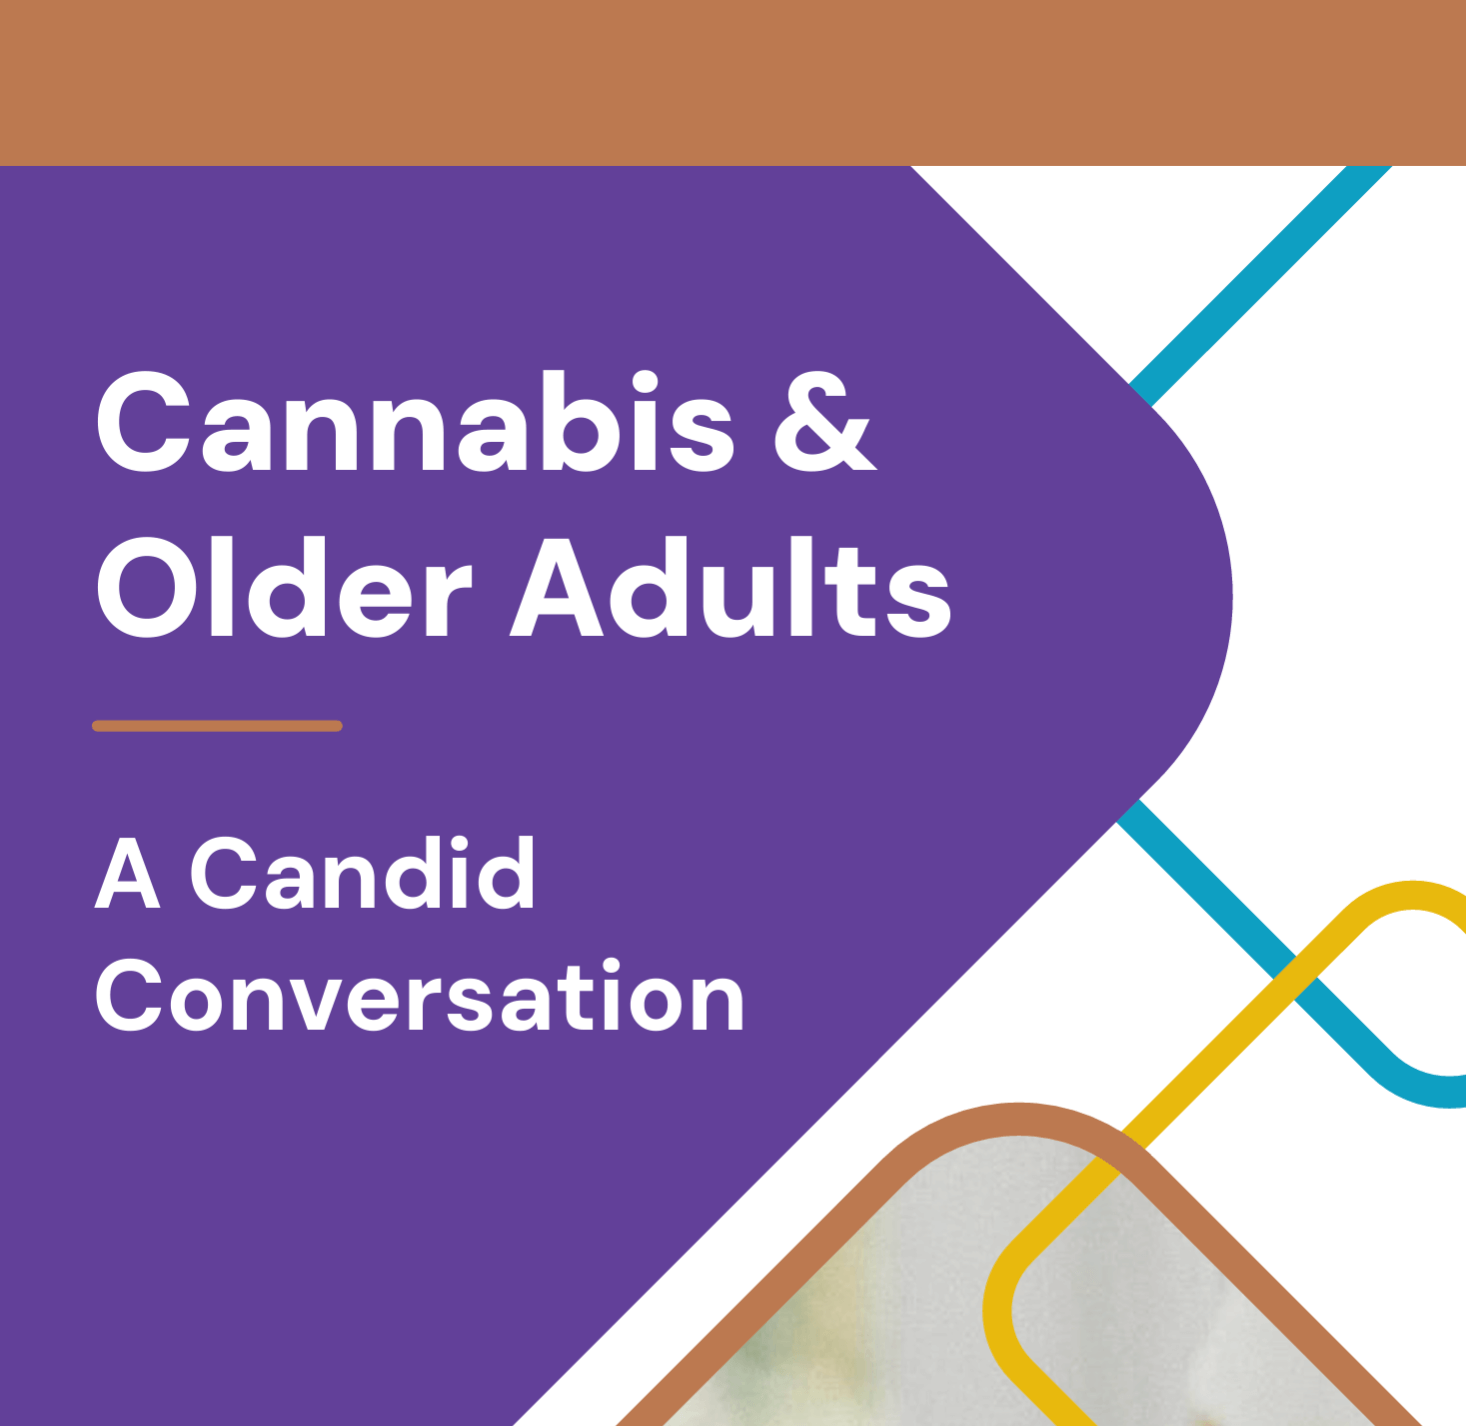 Cover image of the cannabis use brochure